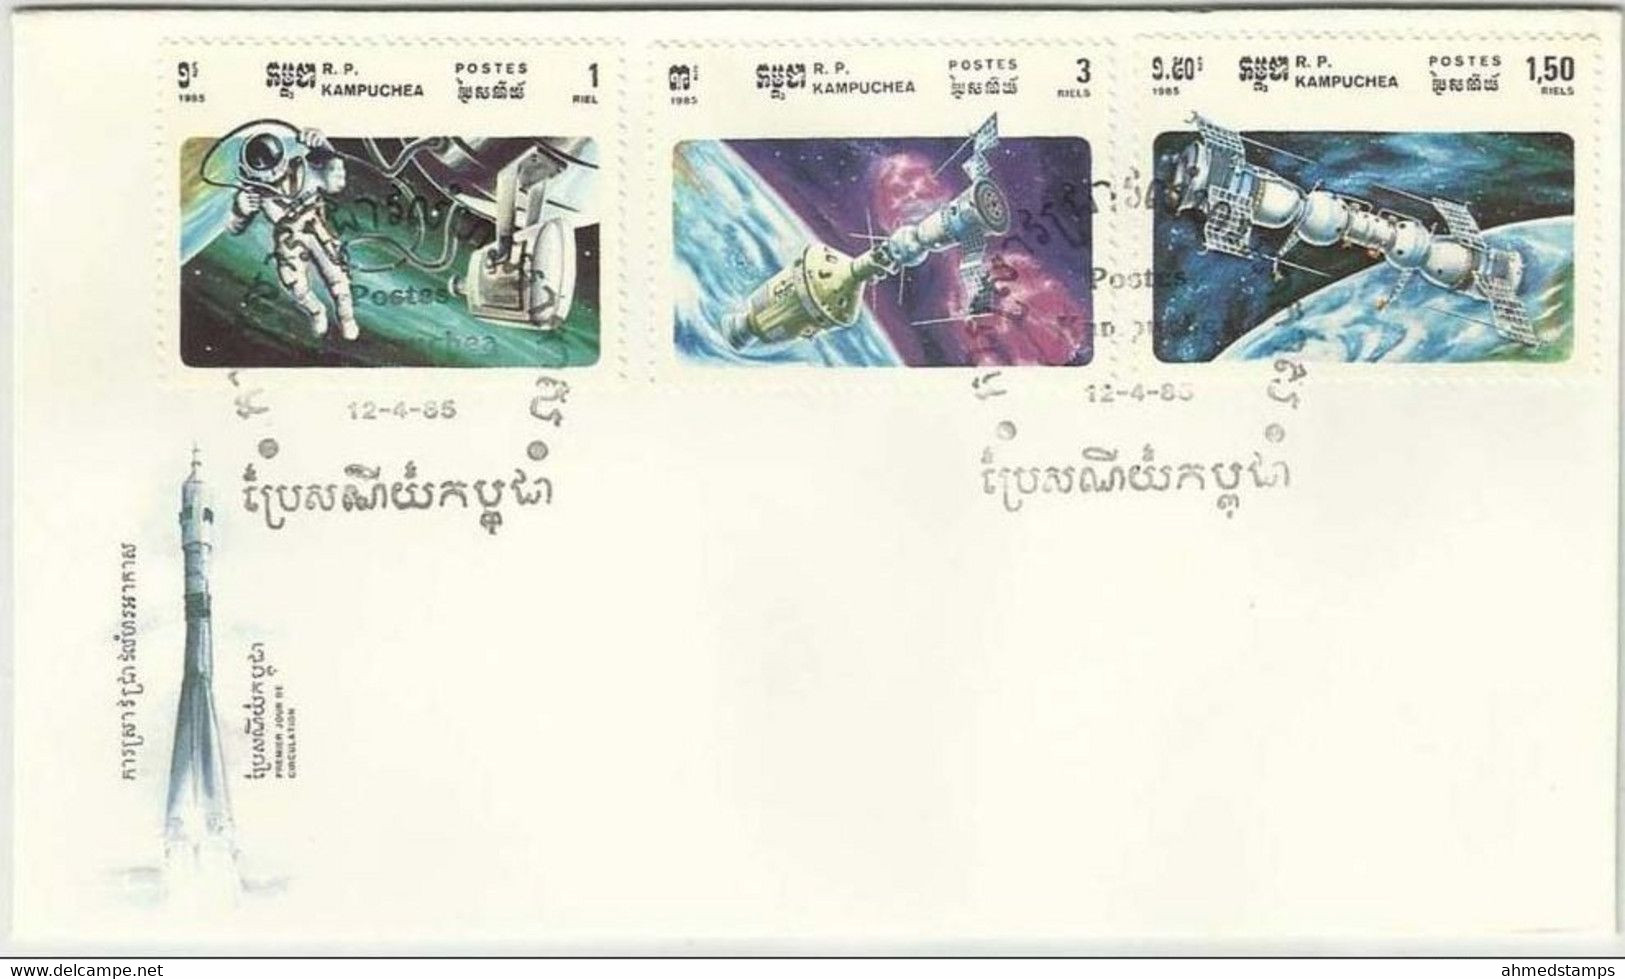 Kampuchea 1985 MNH FDC Space, Spacecraft, Satellite, Earth, Astronaut, Space Station, Rocket, First Day Cover - Kampuchea